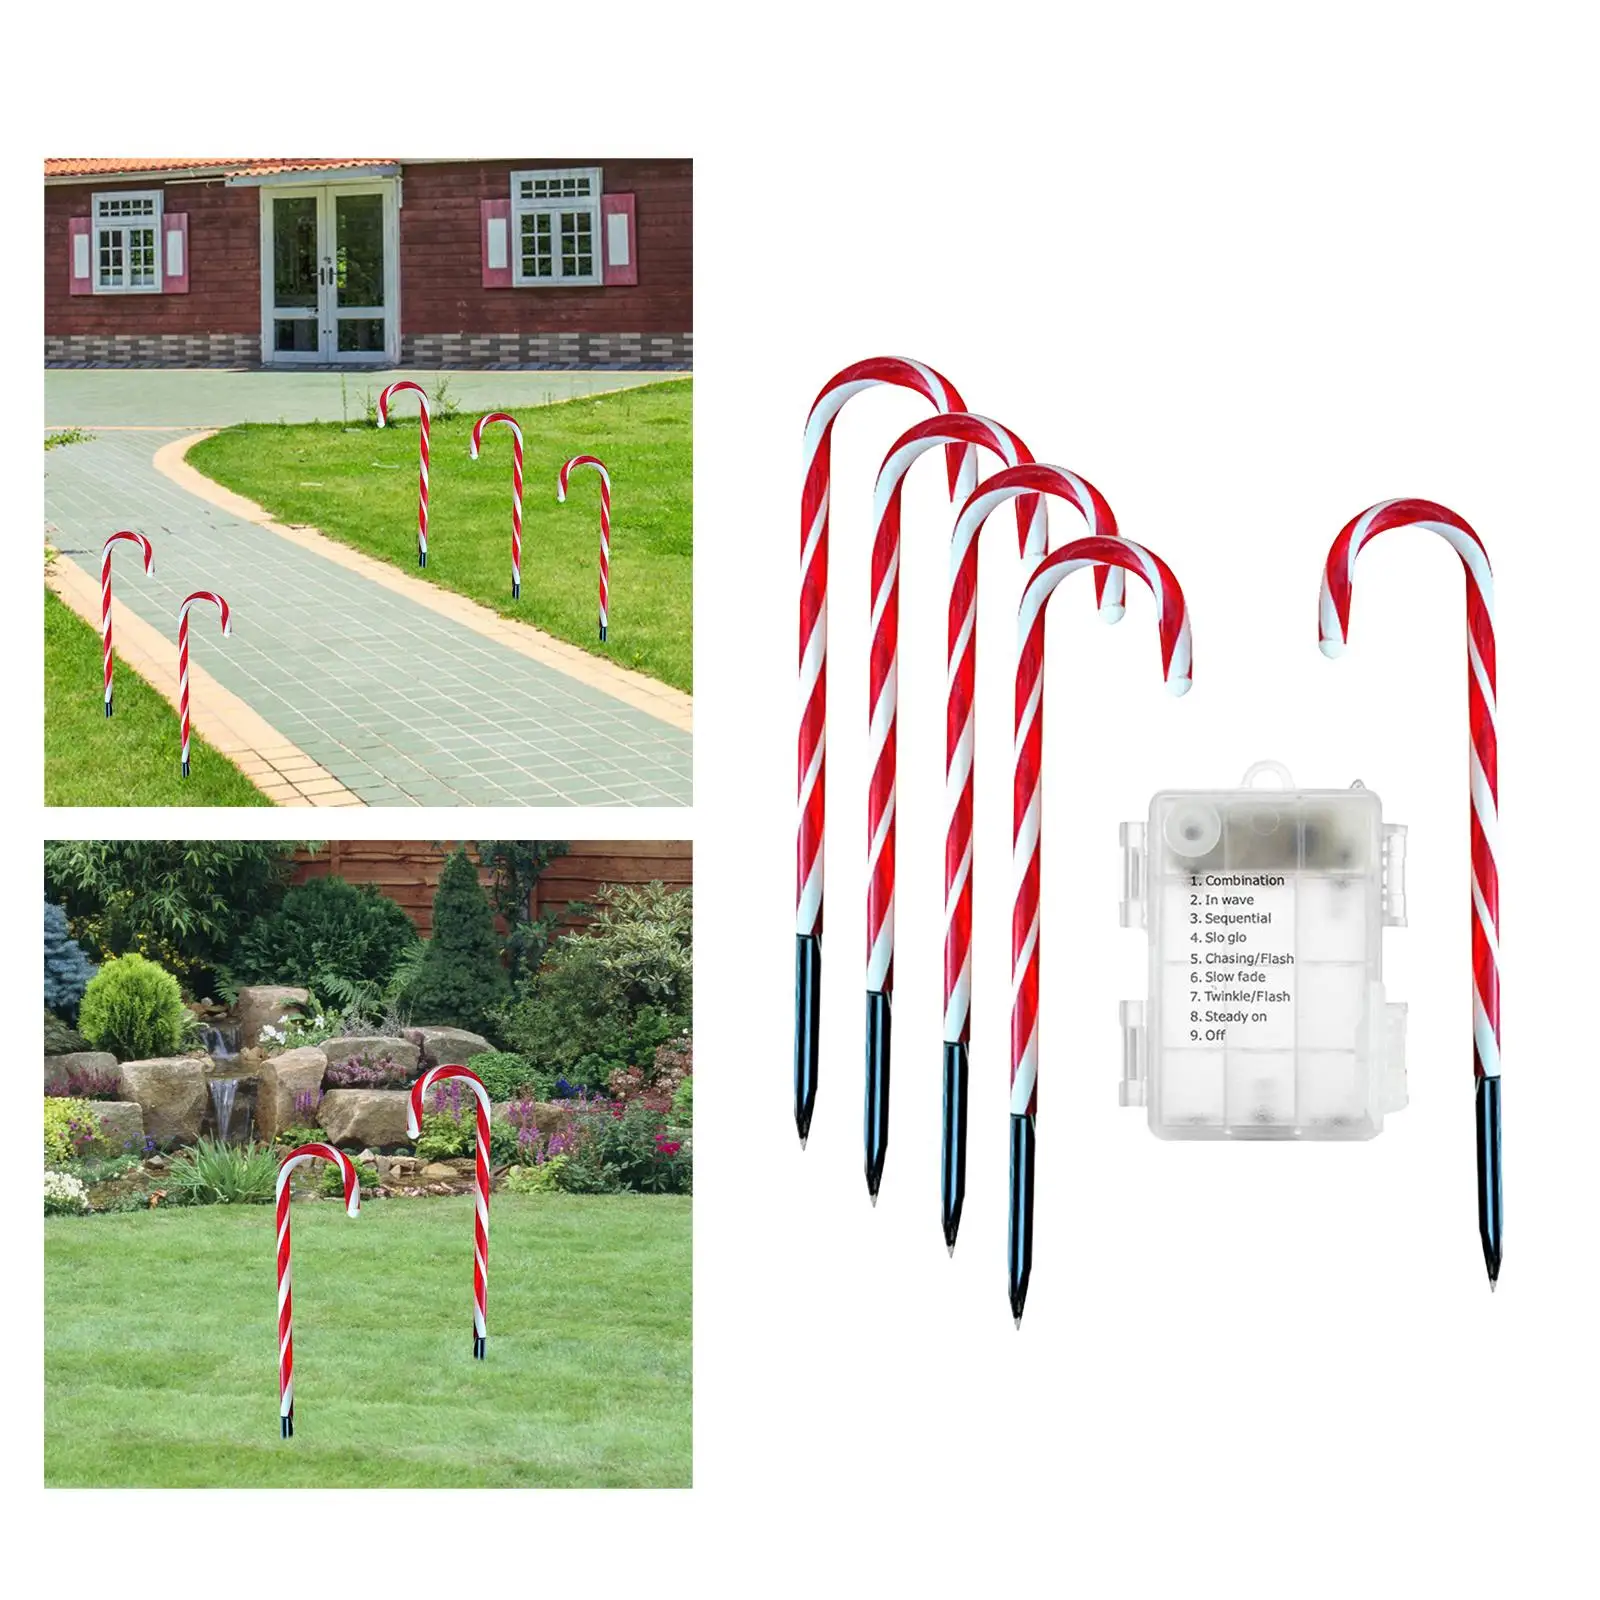 Christmas LED Lamps with Ground Stake Decor Fairy Lights Candy Cane Battery Operated Lights for Holiday Lawn Backyard Xmas Patio